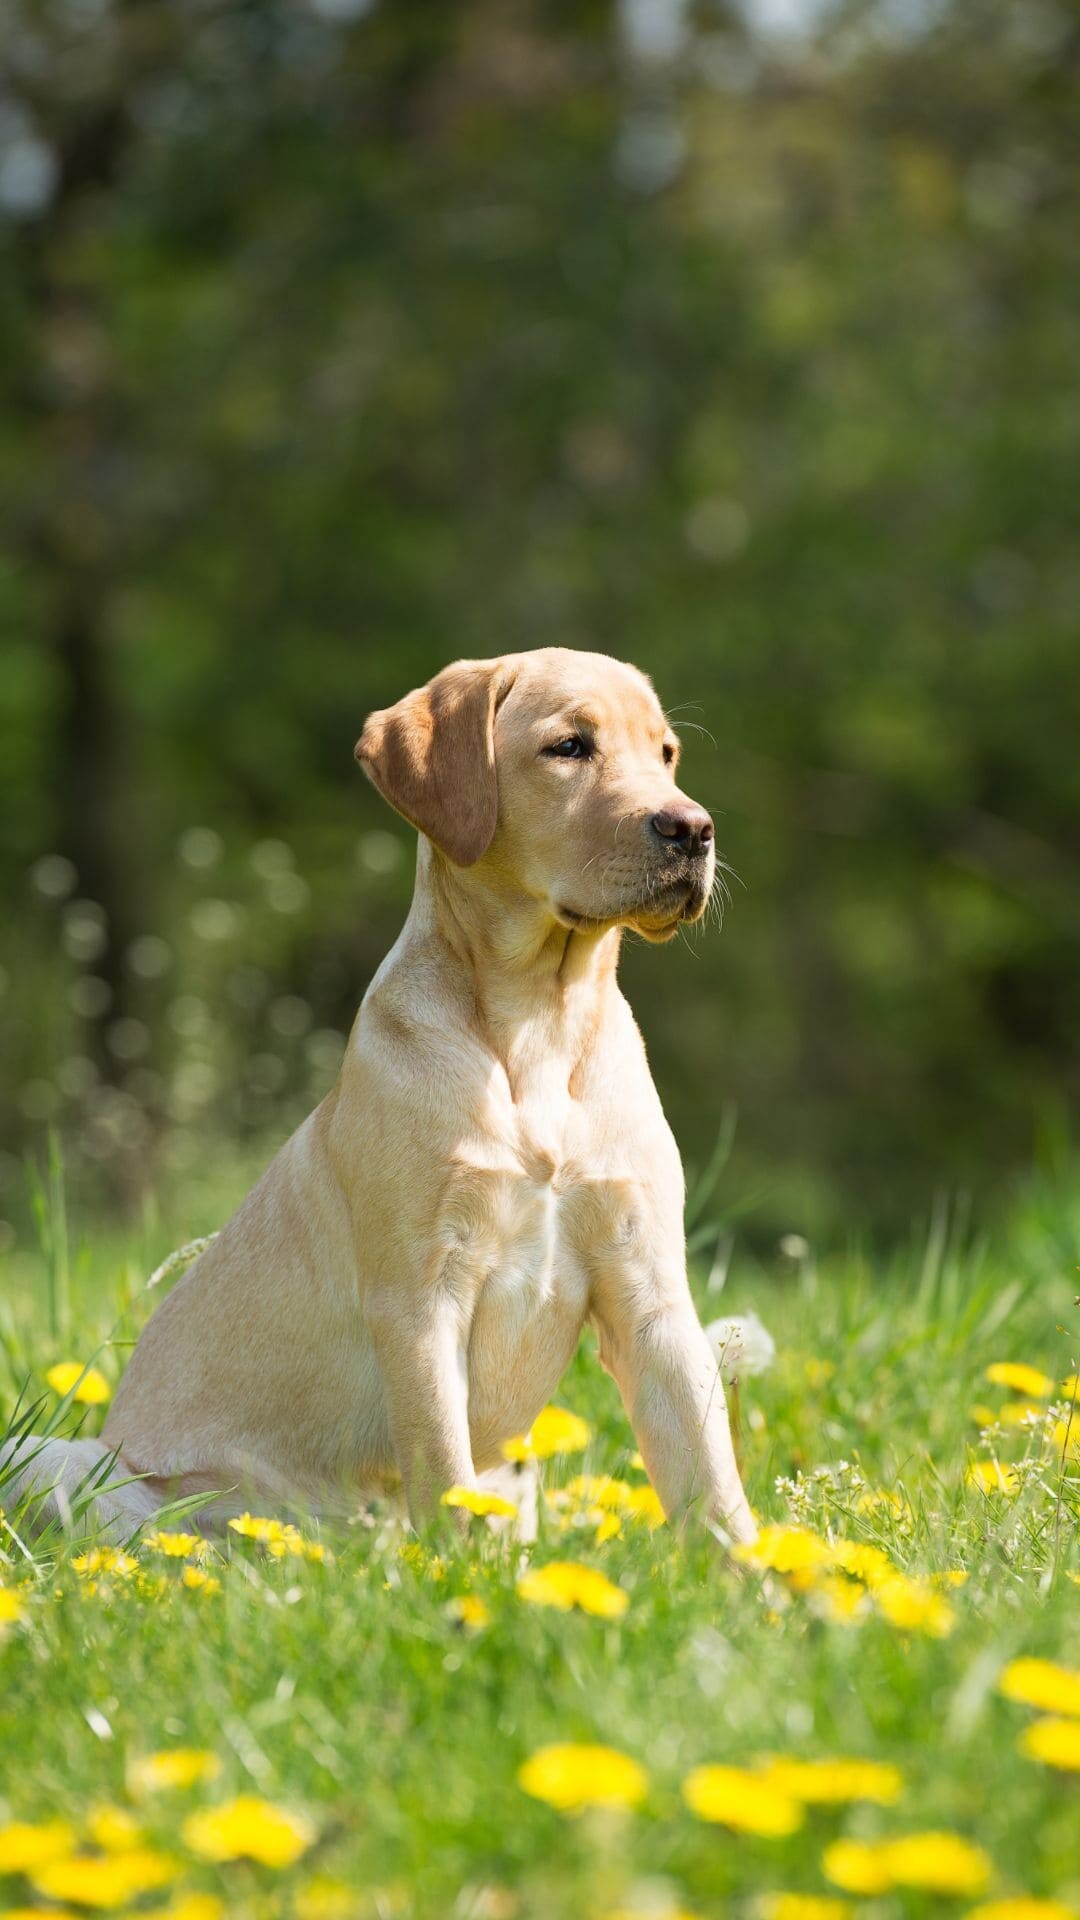 Labrador: They are intelligent and fairly easy to train, partly from their desire to work with people, Dog breed. 1080x1920 Full HD Wallpaper.